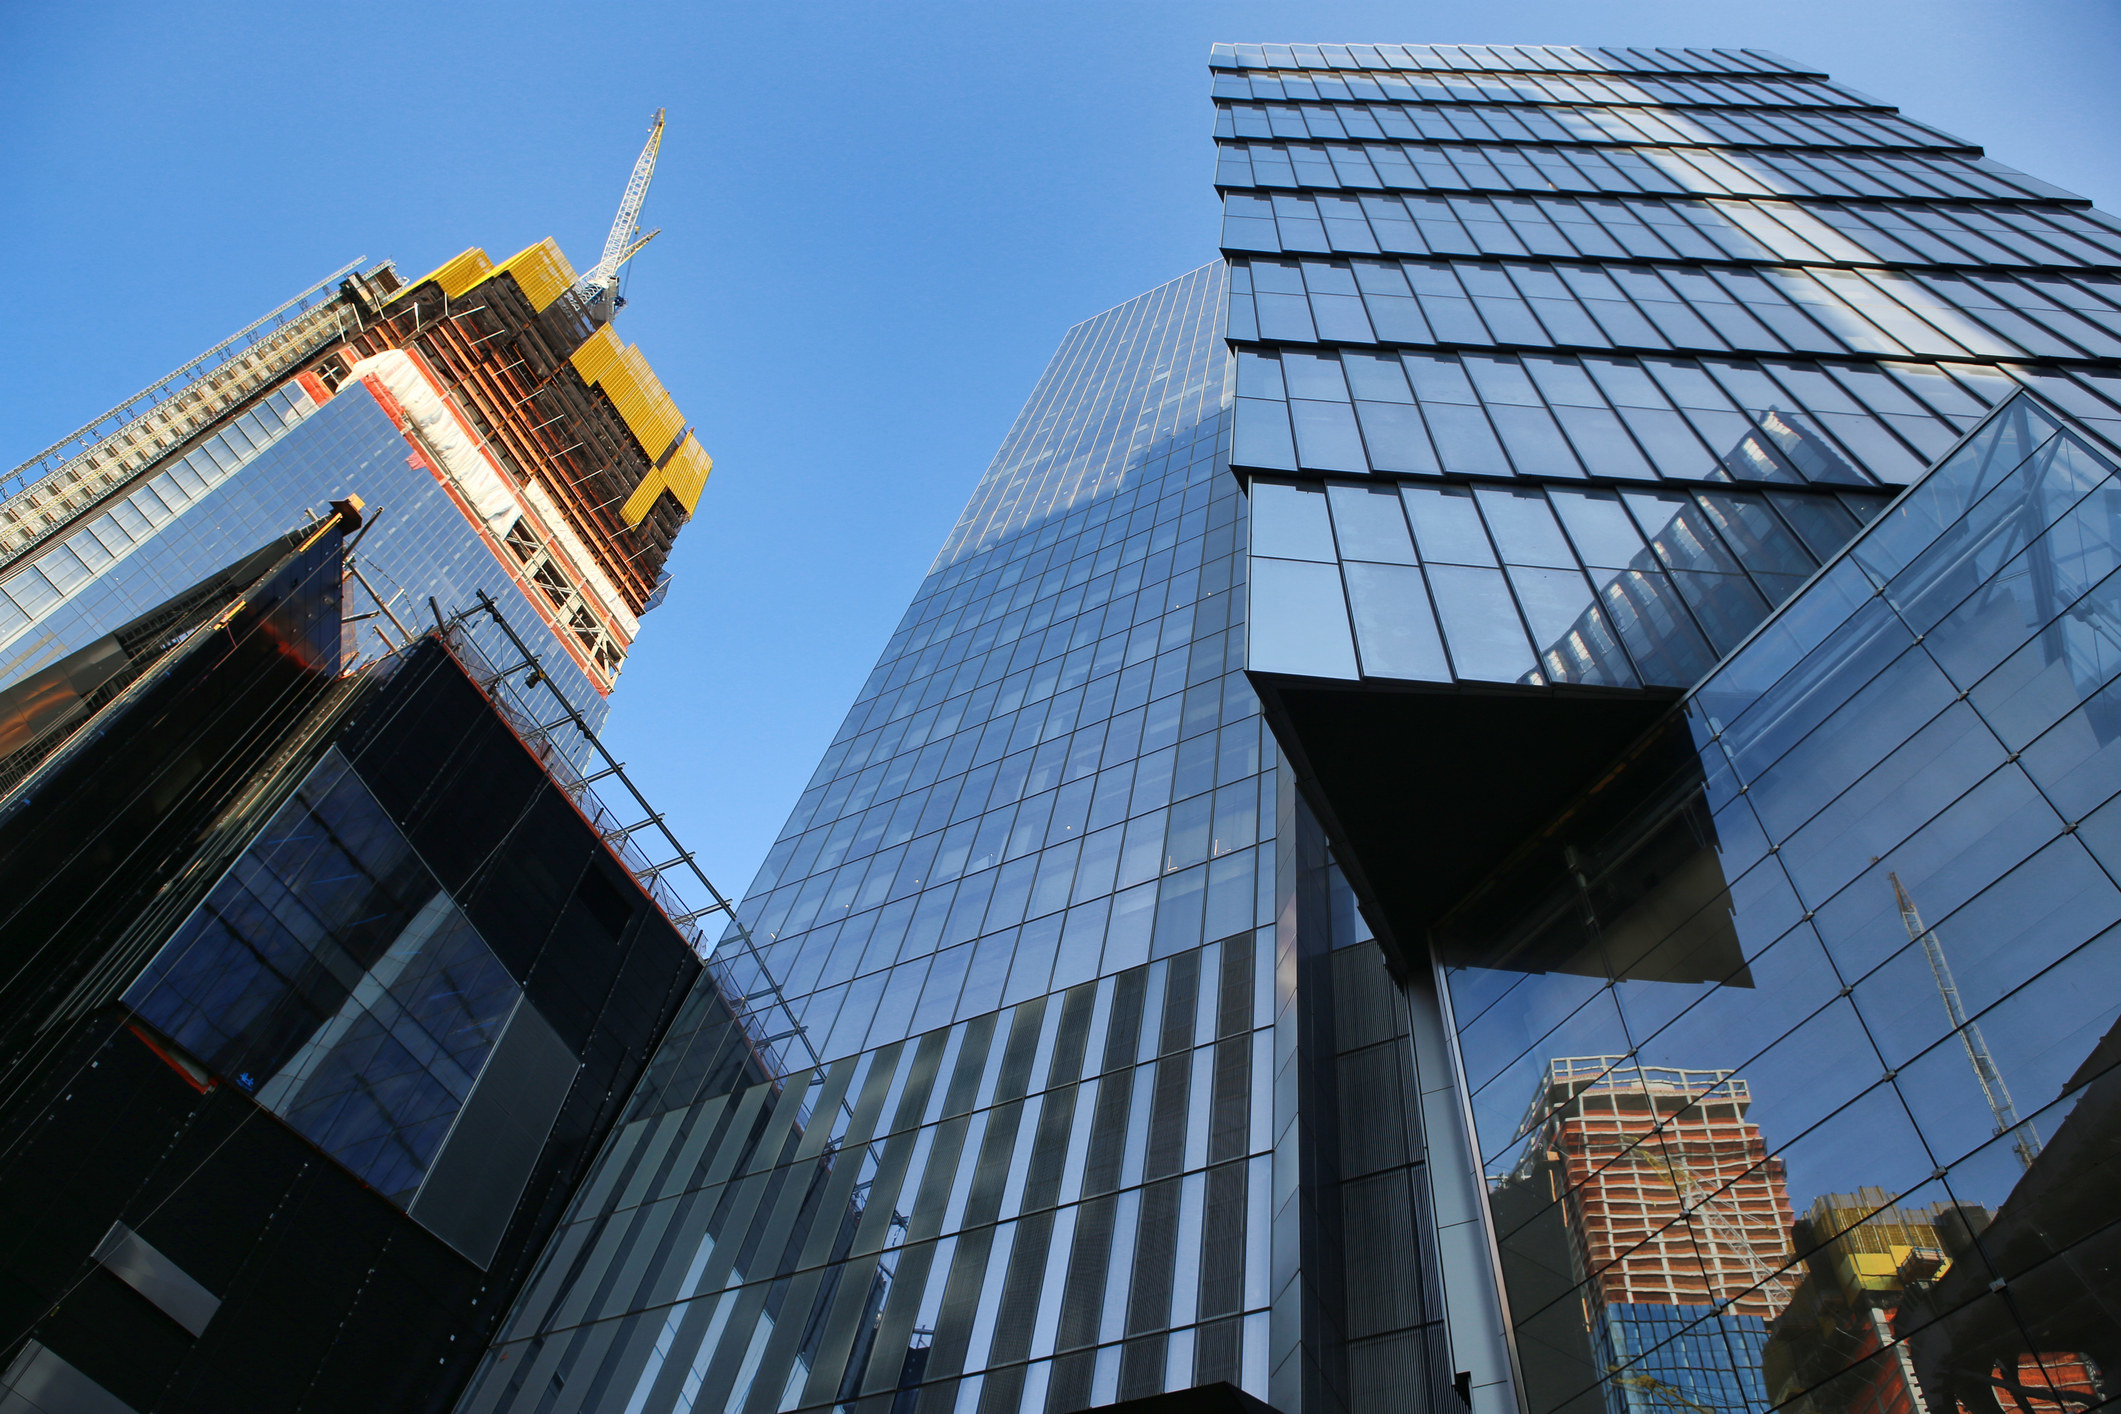 A view of high-rise buildings from below